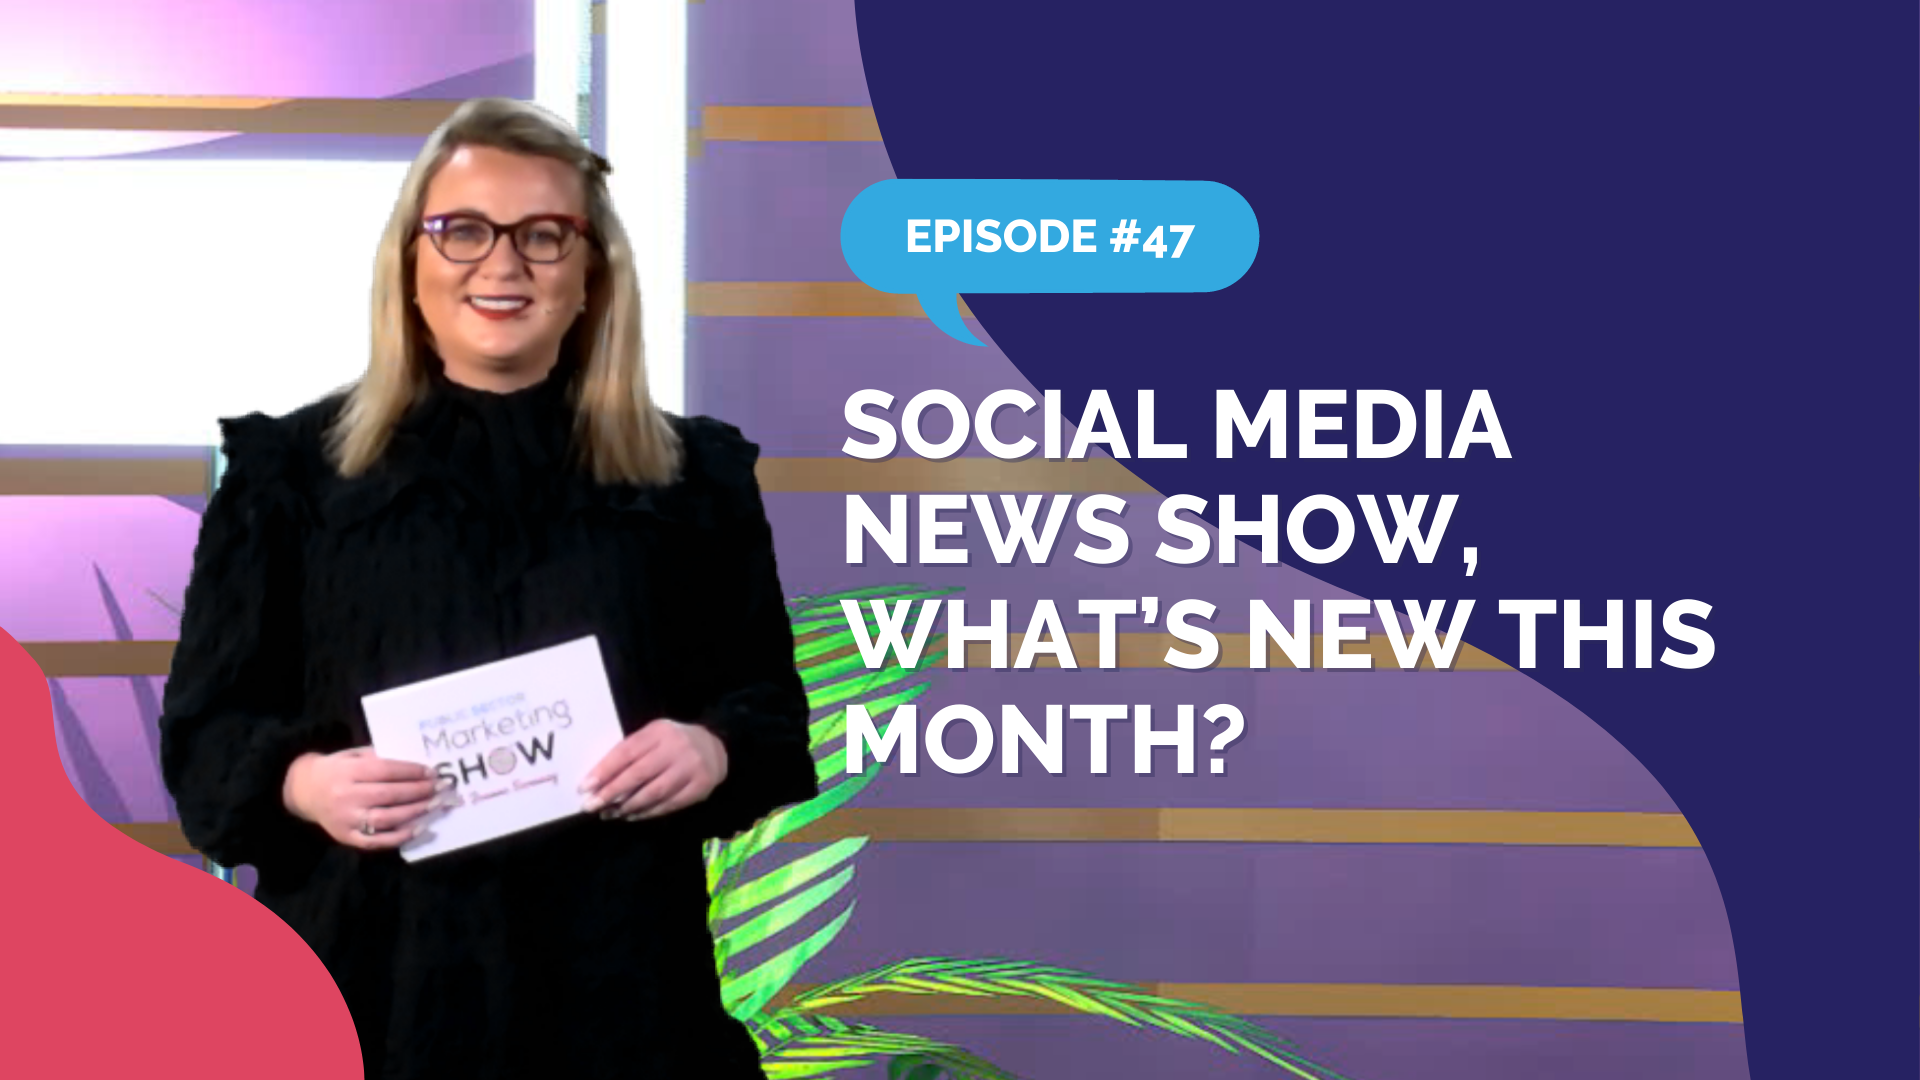 Episode 47 - Social Media News Show, What’s New This Month?